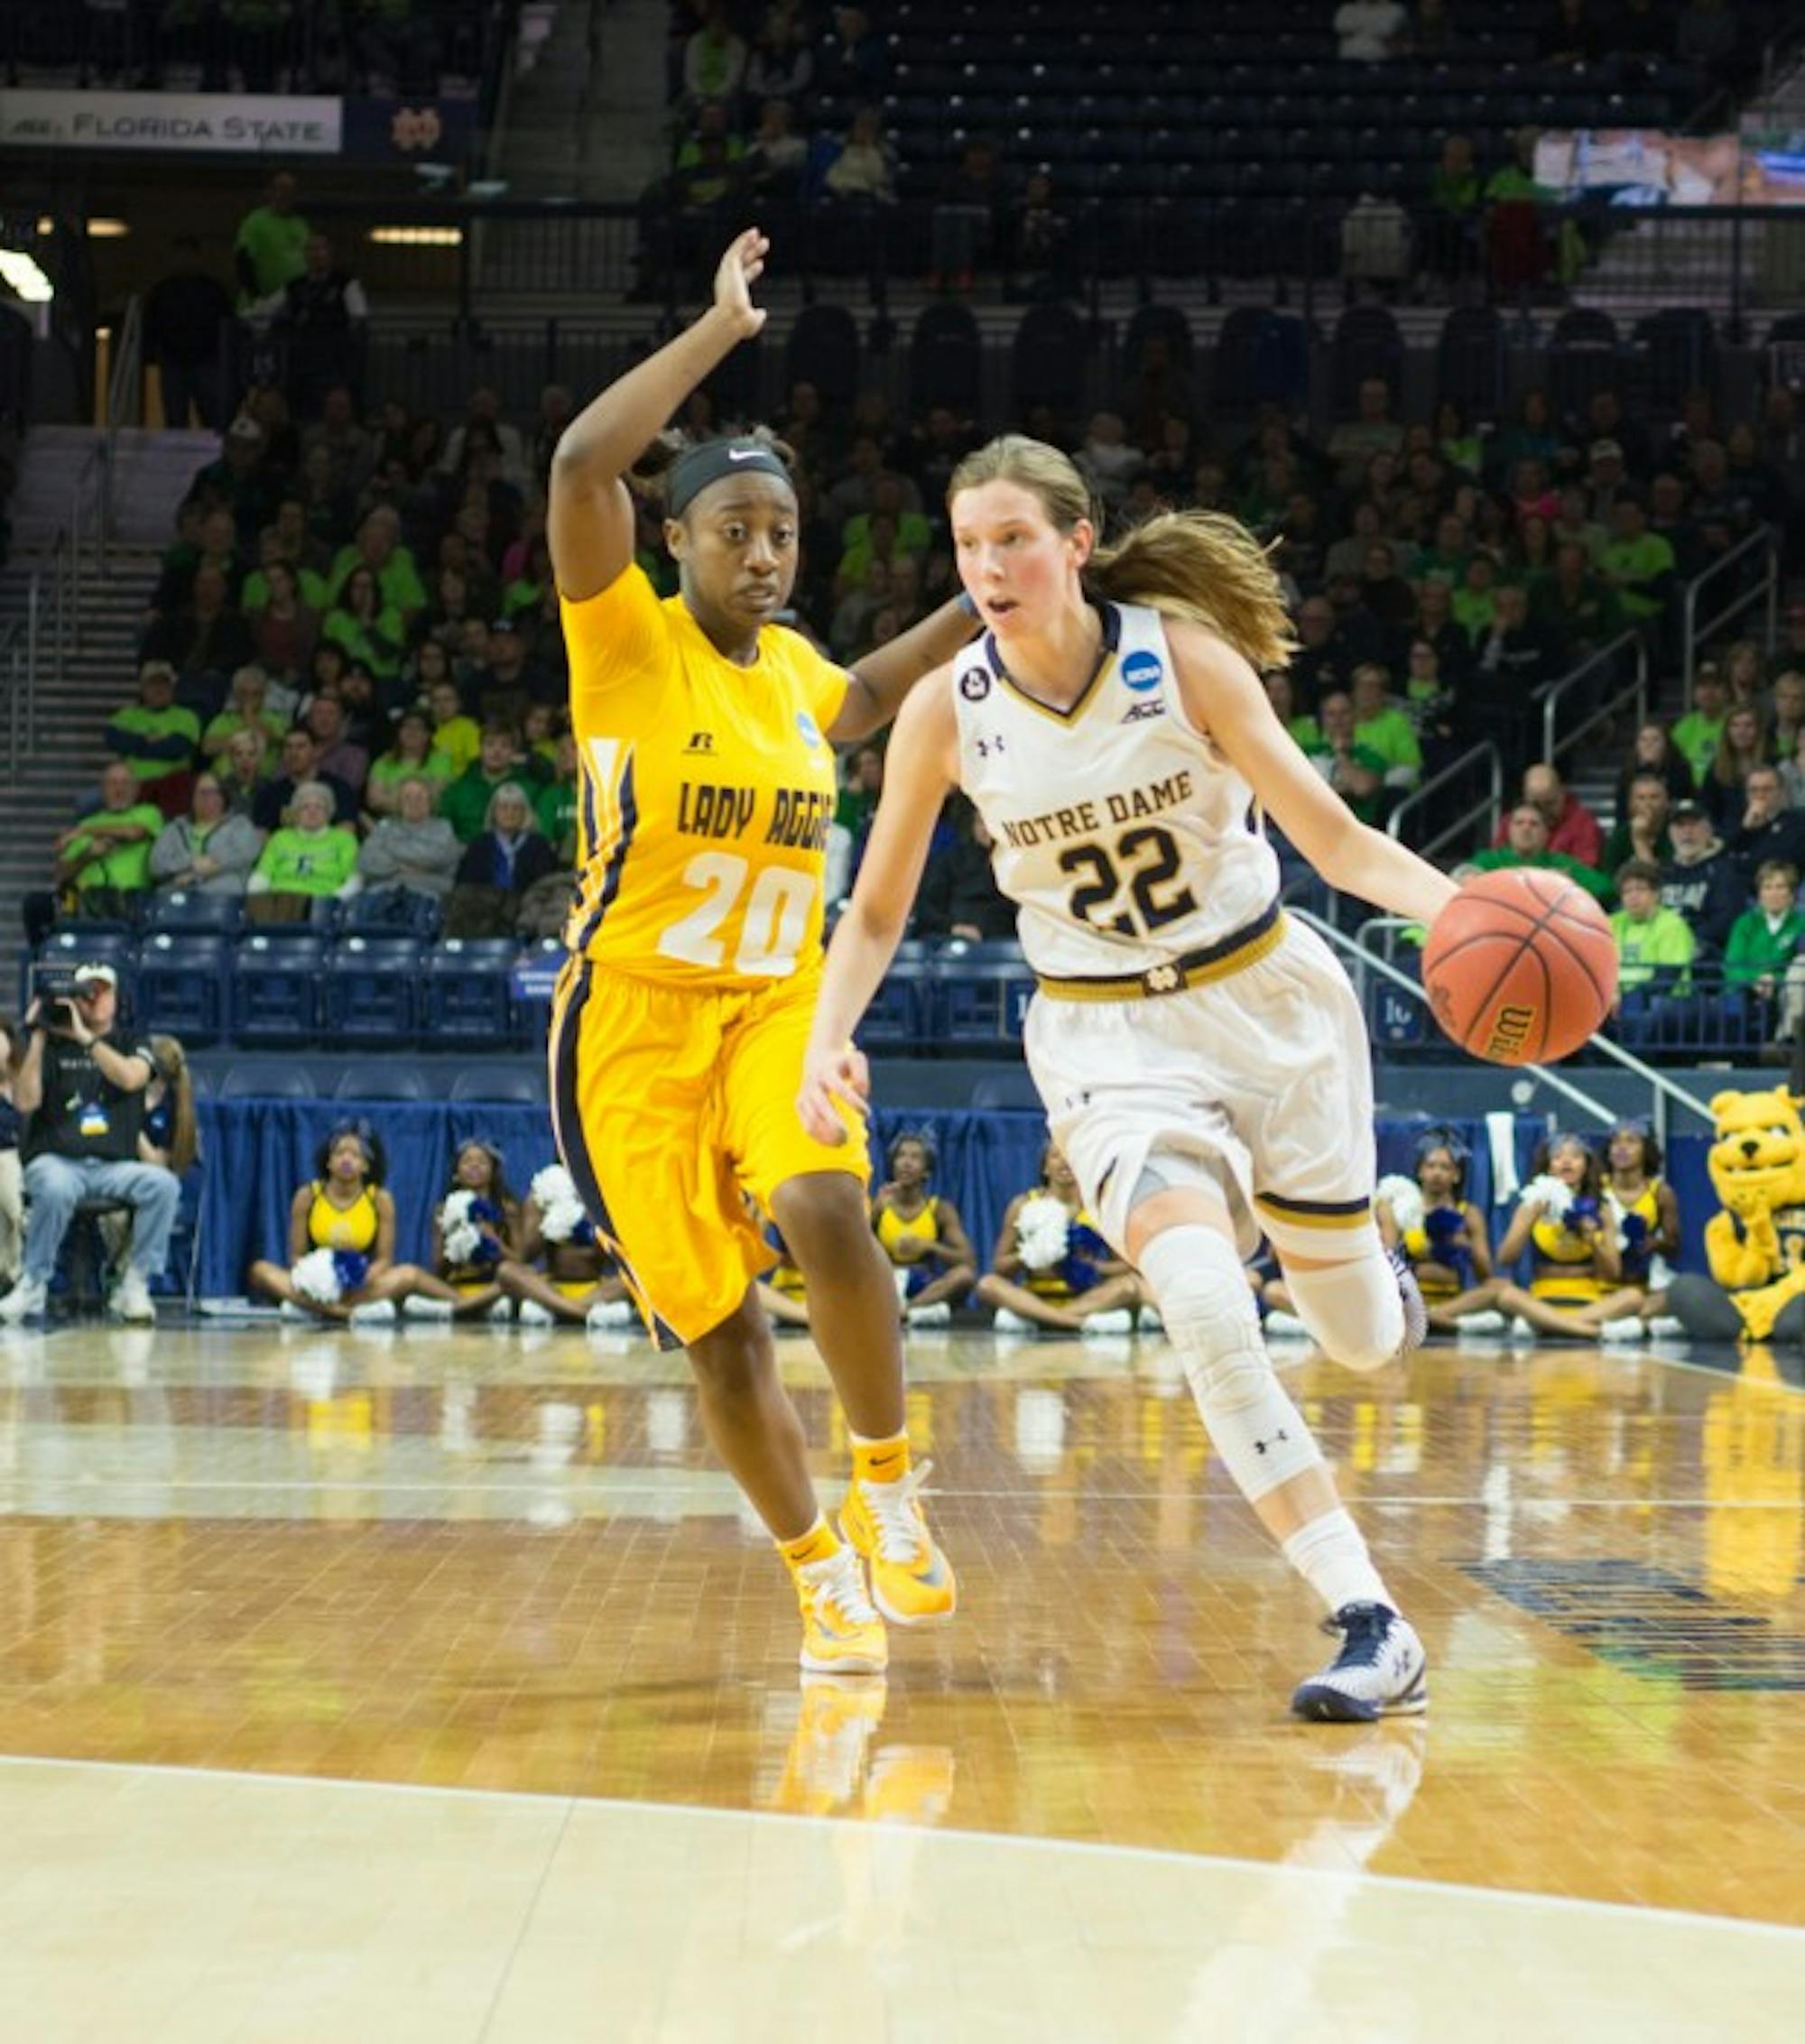 Irish graduate student guard Madison Cable dribbles around a North Carolina A&T defender during Notre Dame's 95-61 win in the first round of the NCAA tournament Saturday at Purcell Pavilion.